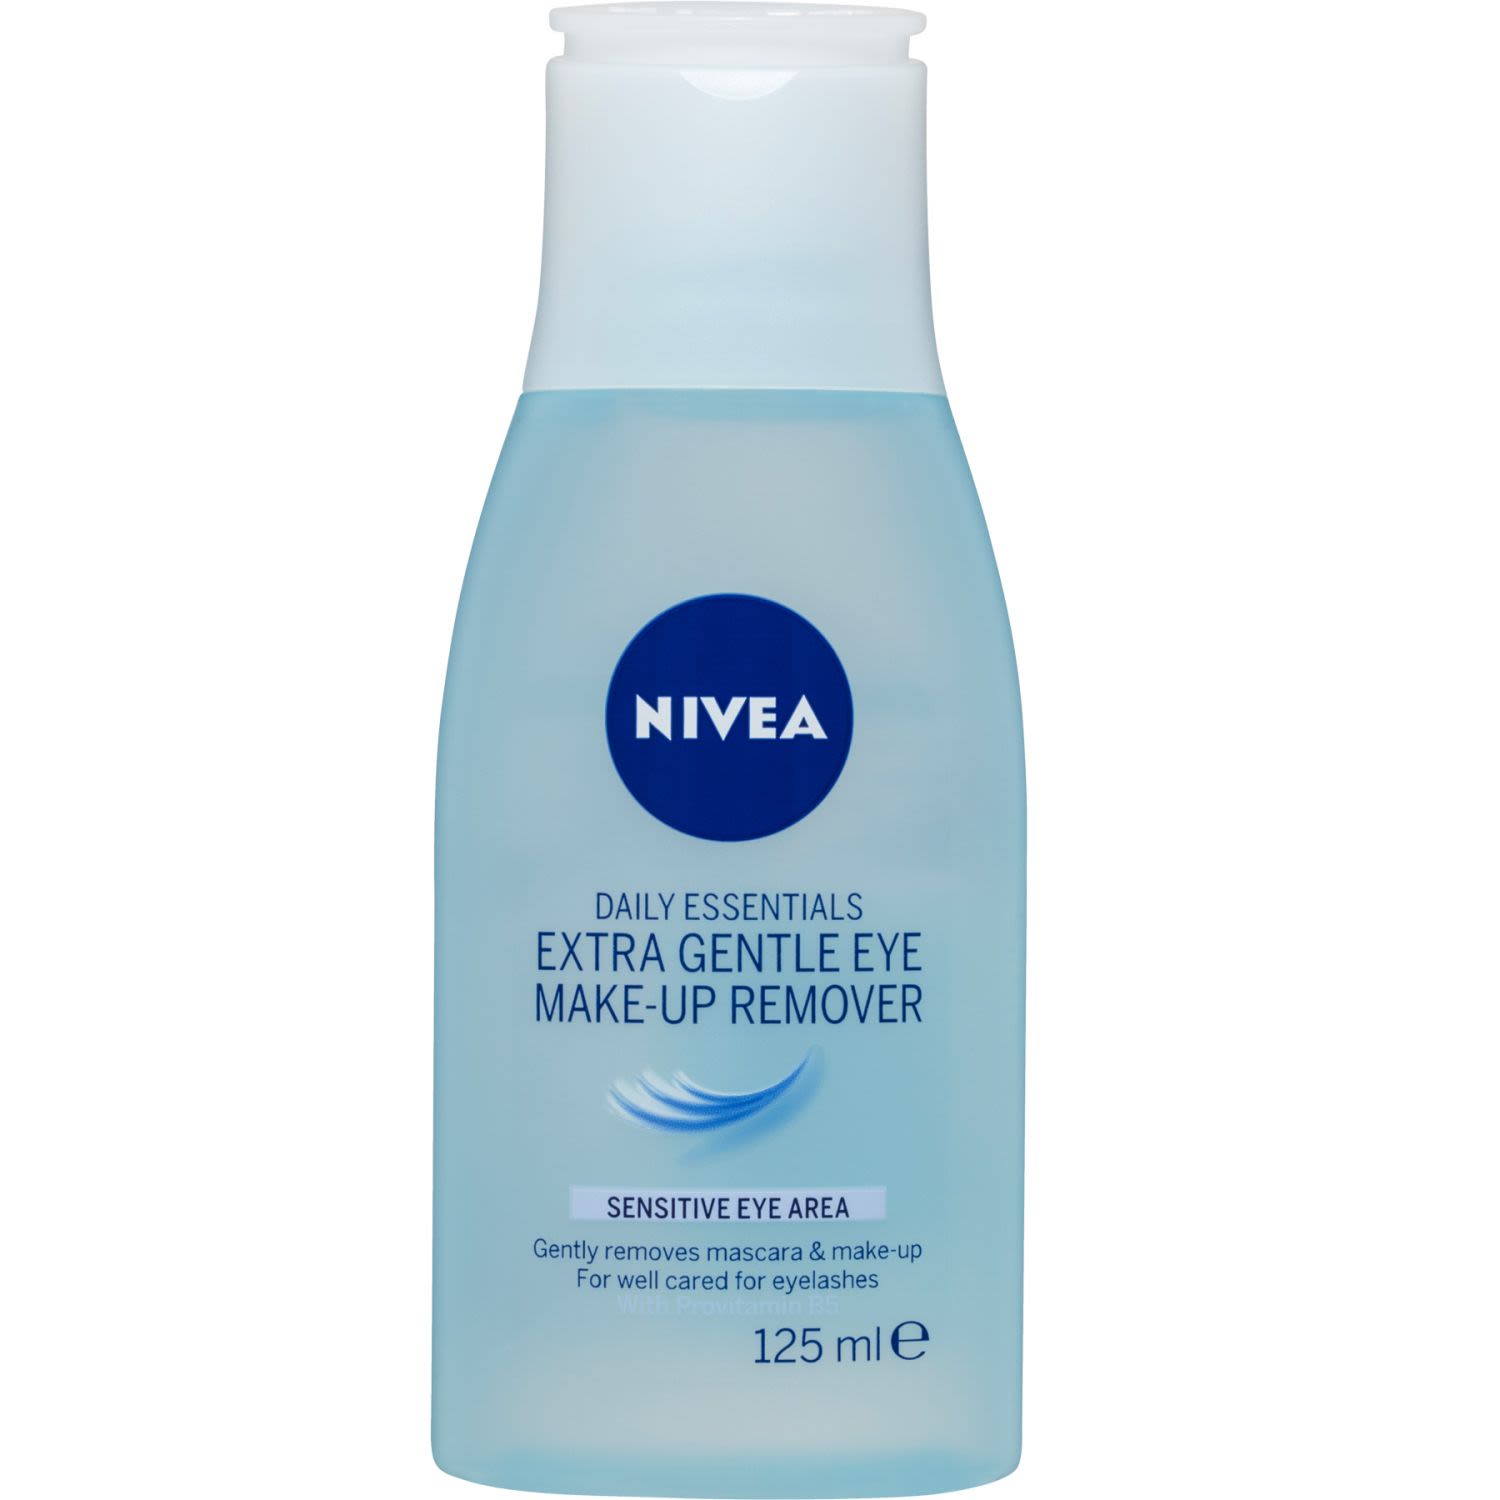 Daily Essentials Extra Gentle Eye Make-Up Remover has a light formulation that gently removes make-up whilst preventing irritation of the delicate eye area. With the soothing benefits of Pro-Vitamin B5, our Extra Gentle Make-Up Remover is dermatologically approved and especially caring to the sensitive eye area.
<br /> <br />